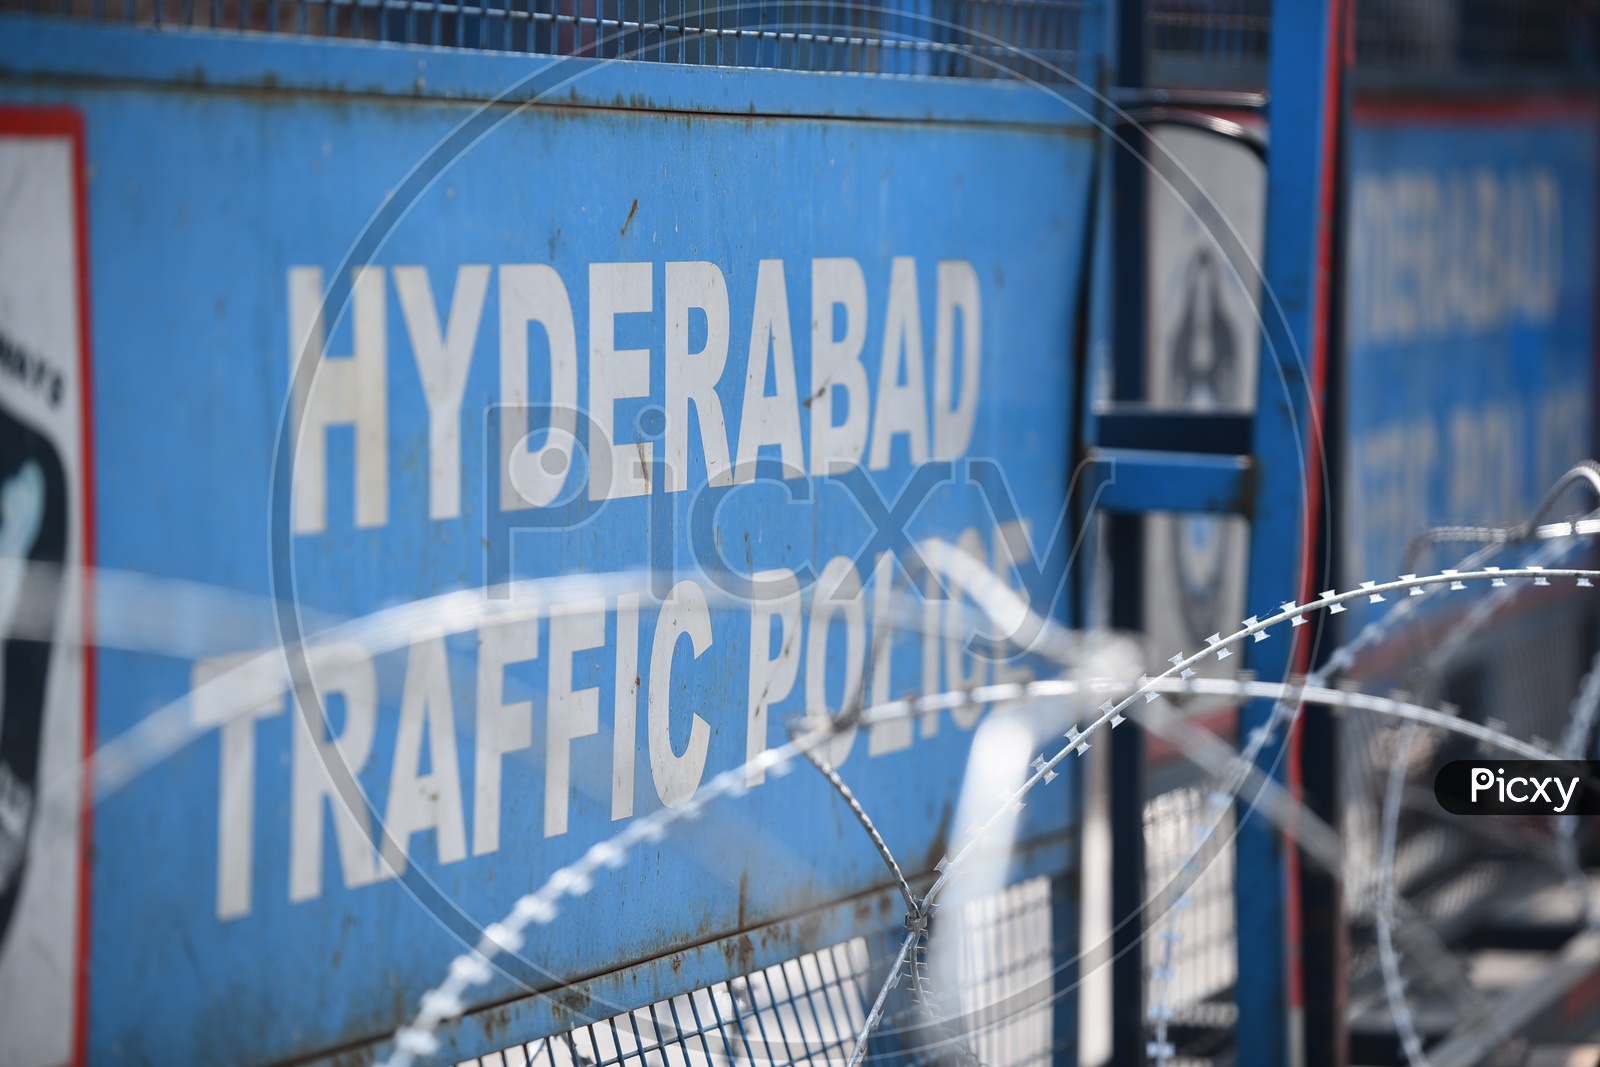 Barricades By Hyderabad Police At Tank Bund For Road Closure Due to Million March Called By TSRTC JAC , Congress And Other Political Parties in Hyderabad